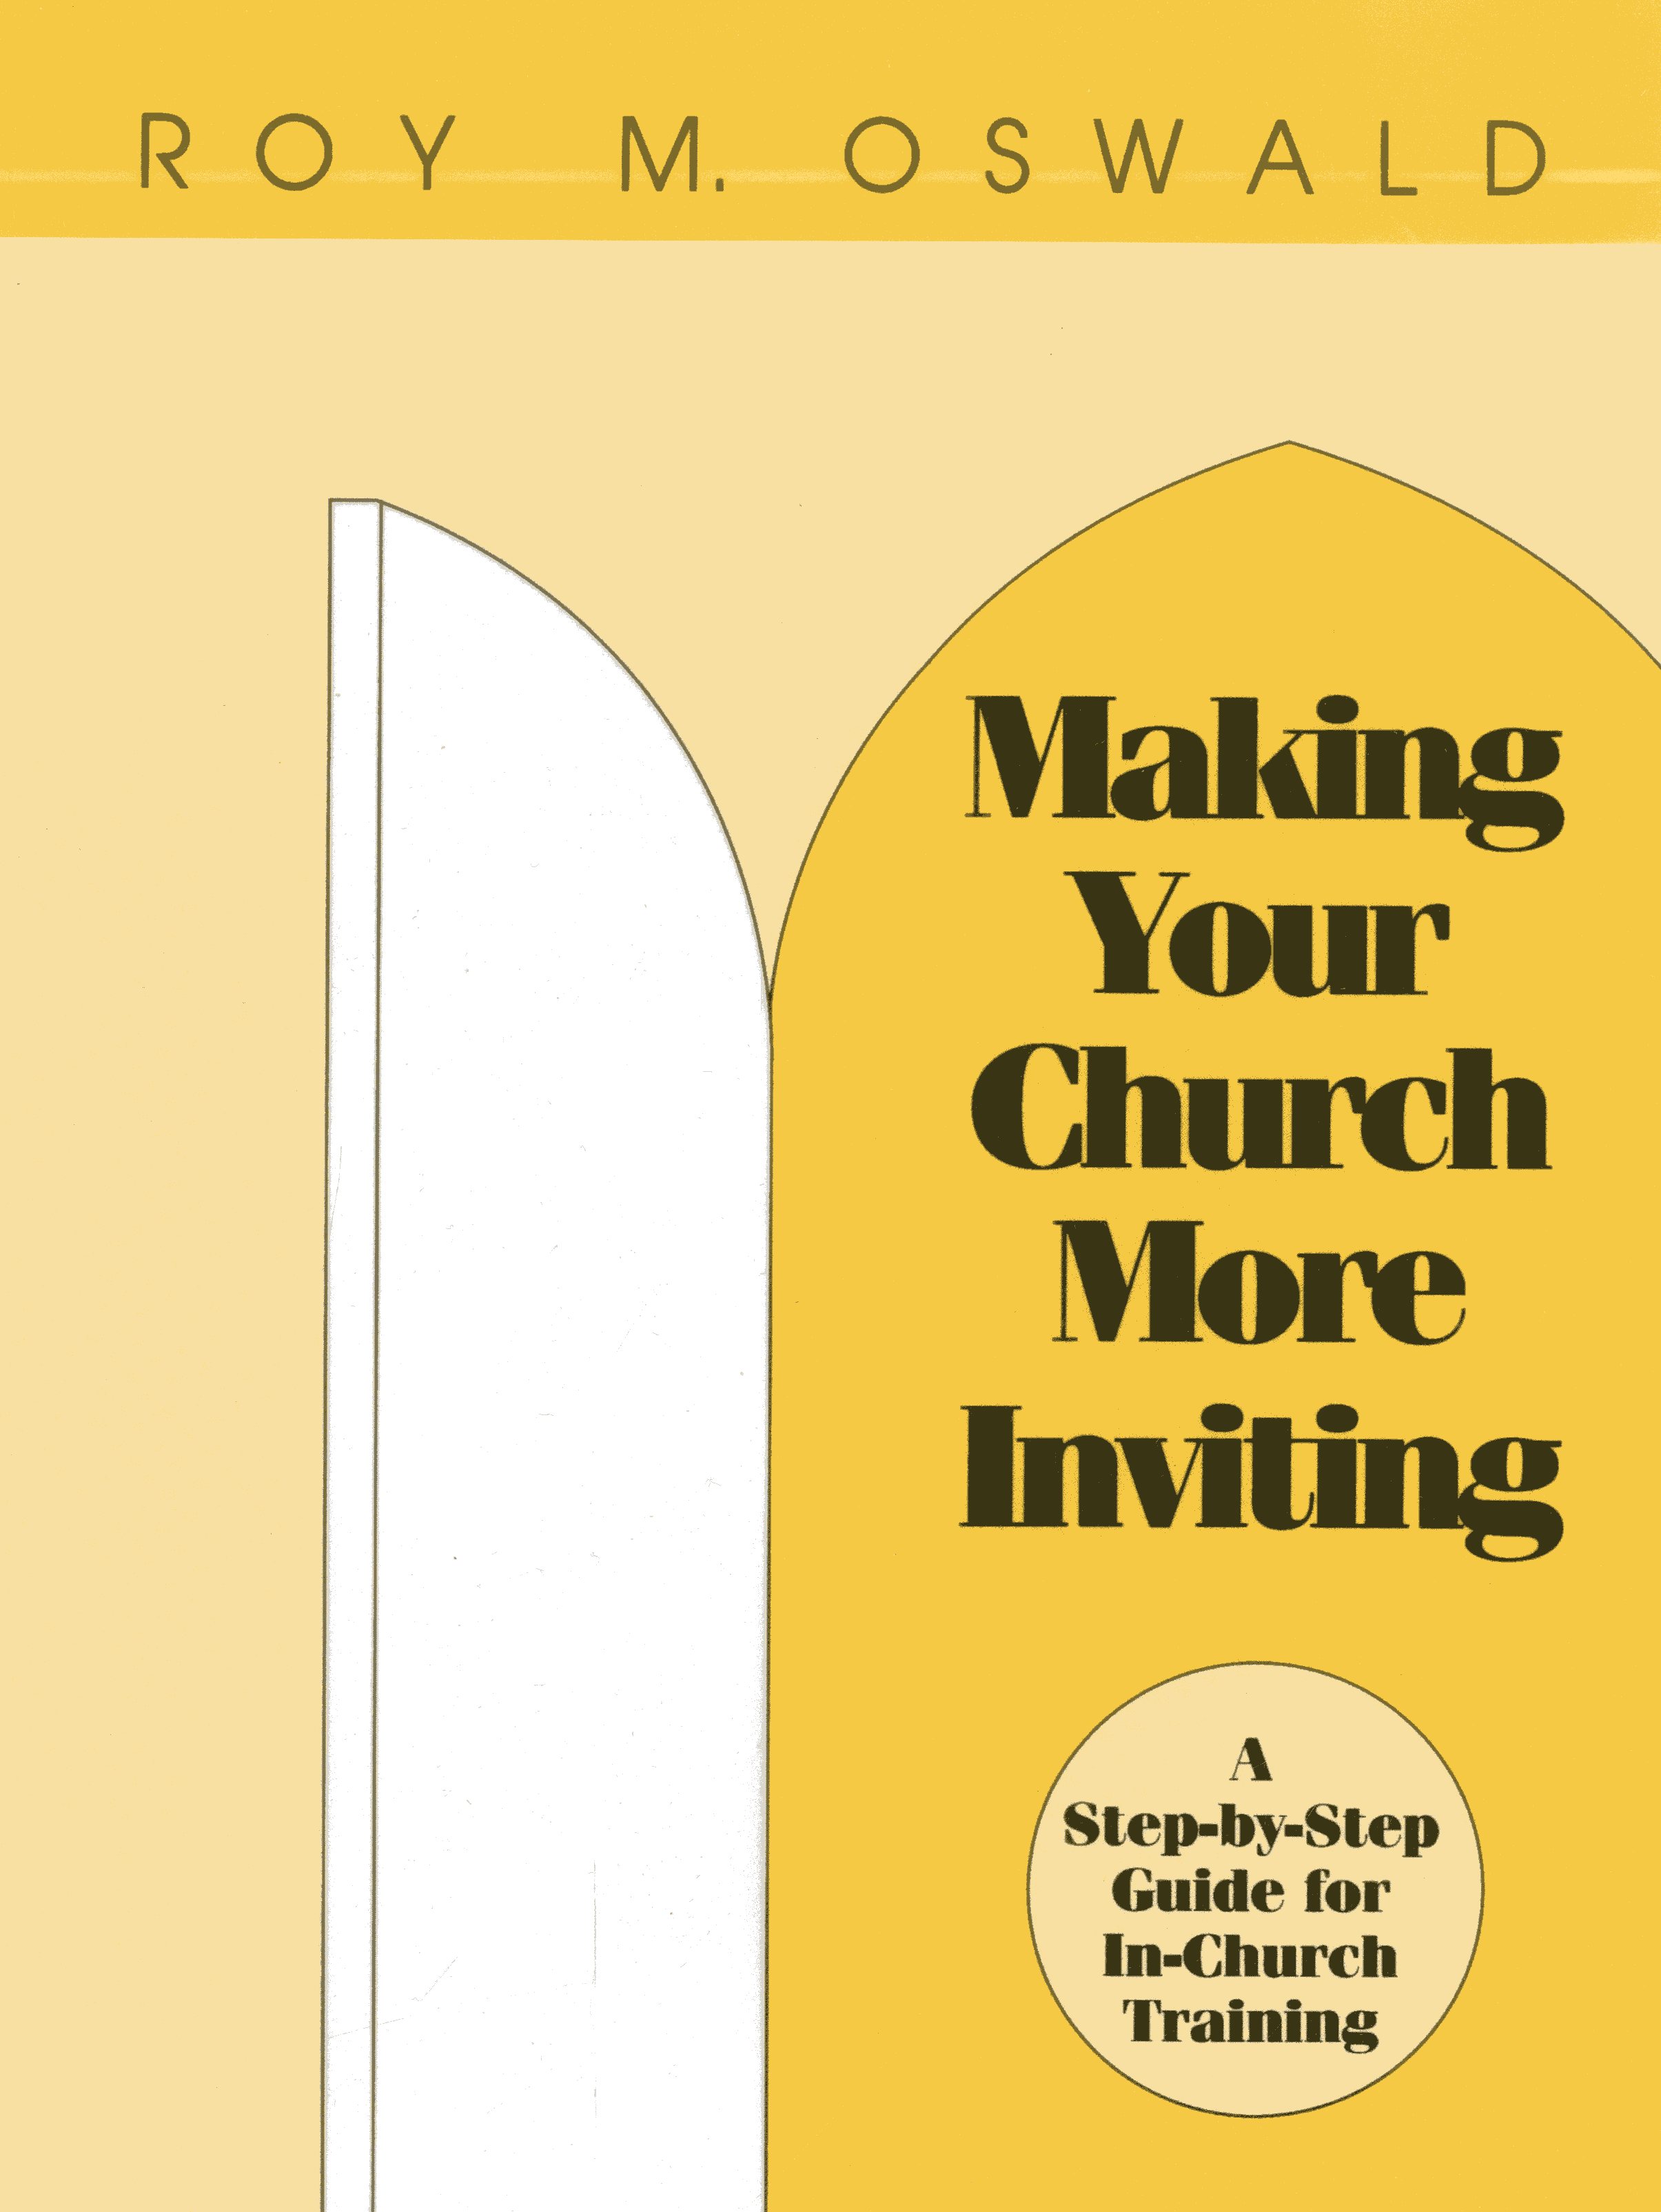 Making Your Church More Inviting: A Step-by-Step Guide for In-Church Training